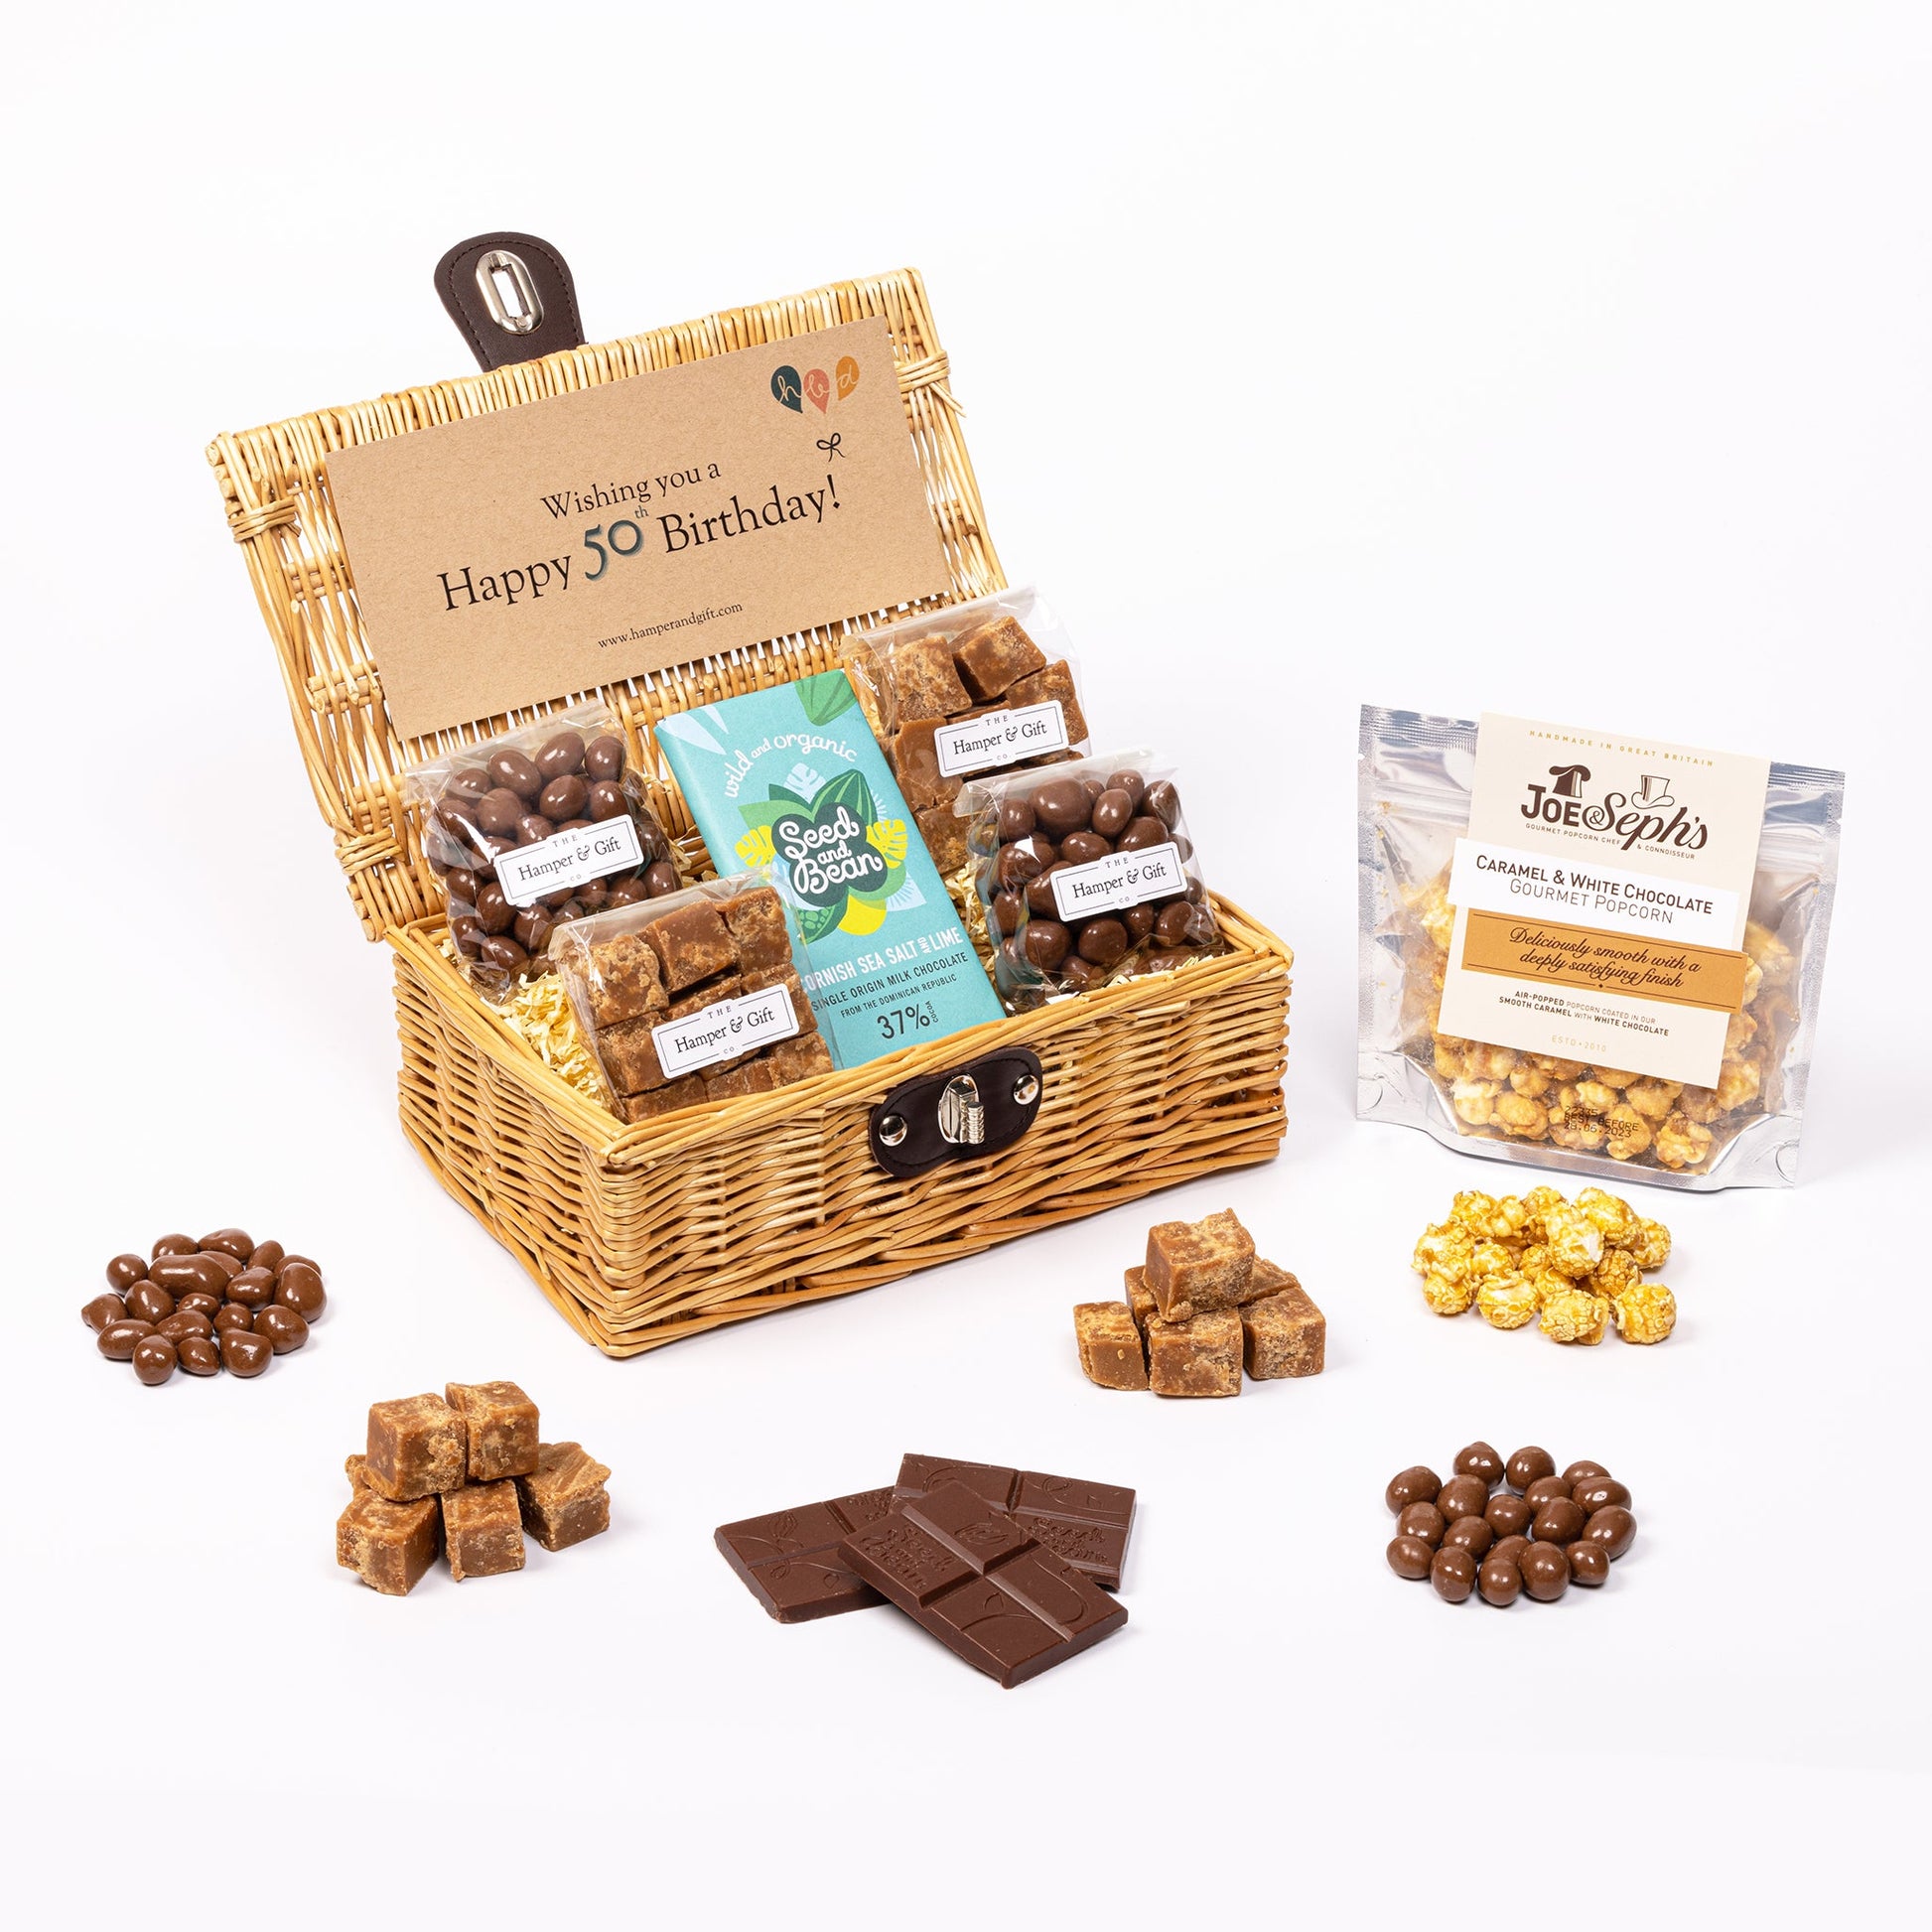 50th Birthday Hamper filled with chocolate, fudge and gourmet popcorn